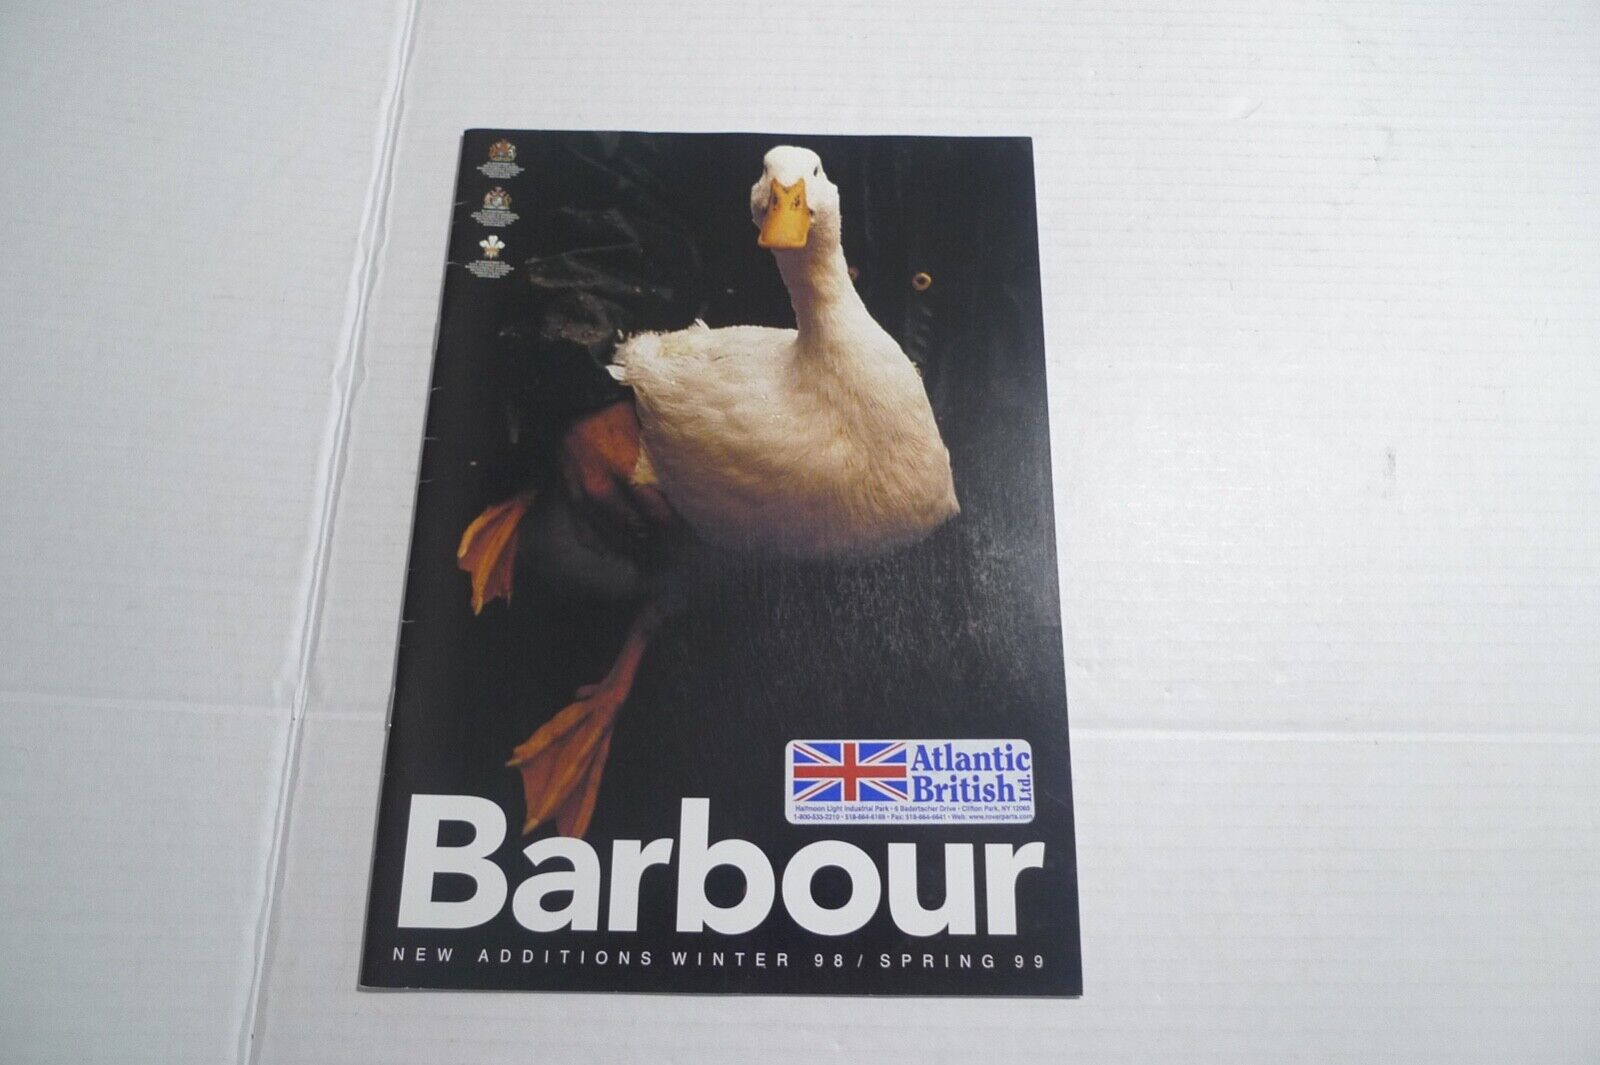 BARBOUR-  NEW ADDITIONS WINTER 98 /SPRING 99 CLOTHING BROCHURE -- PRINTED IN UK